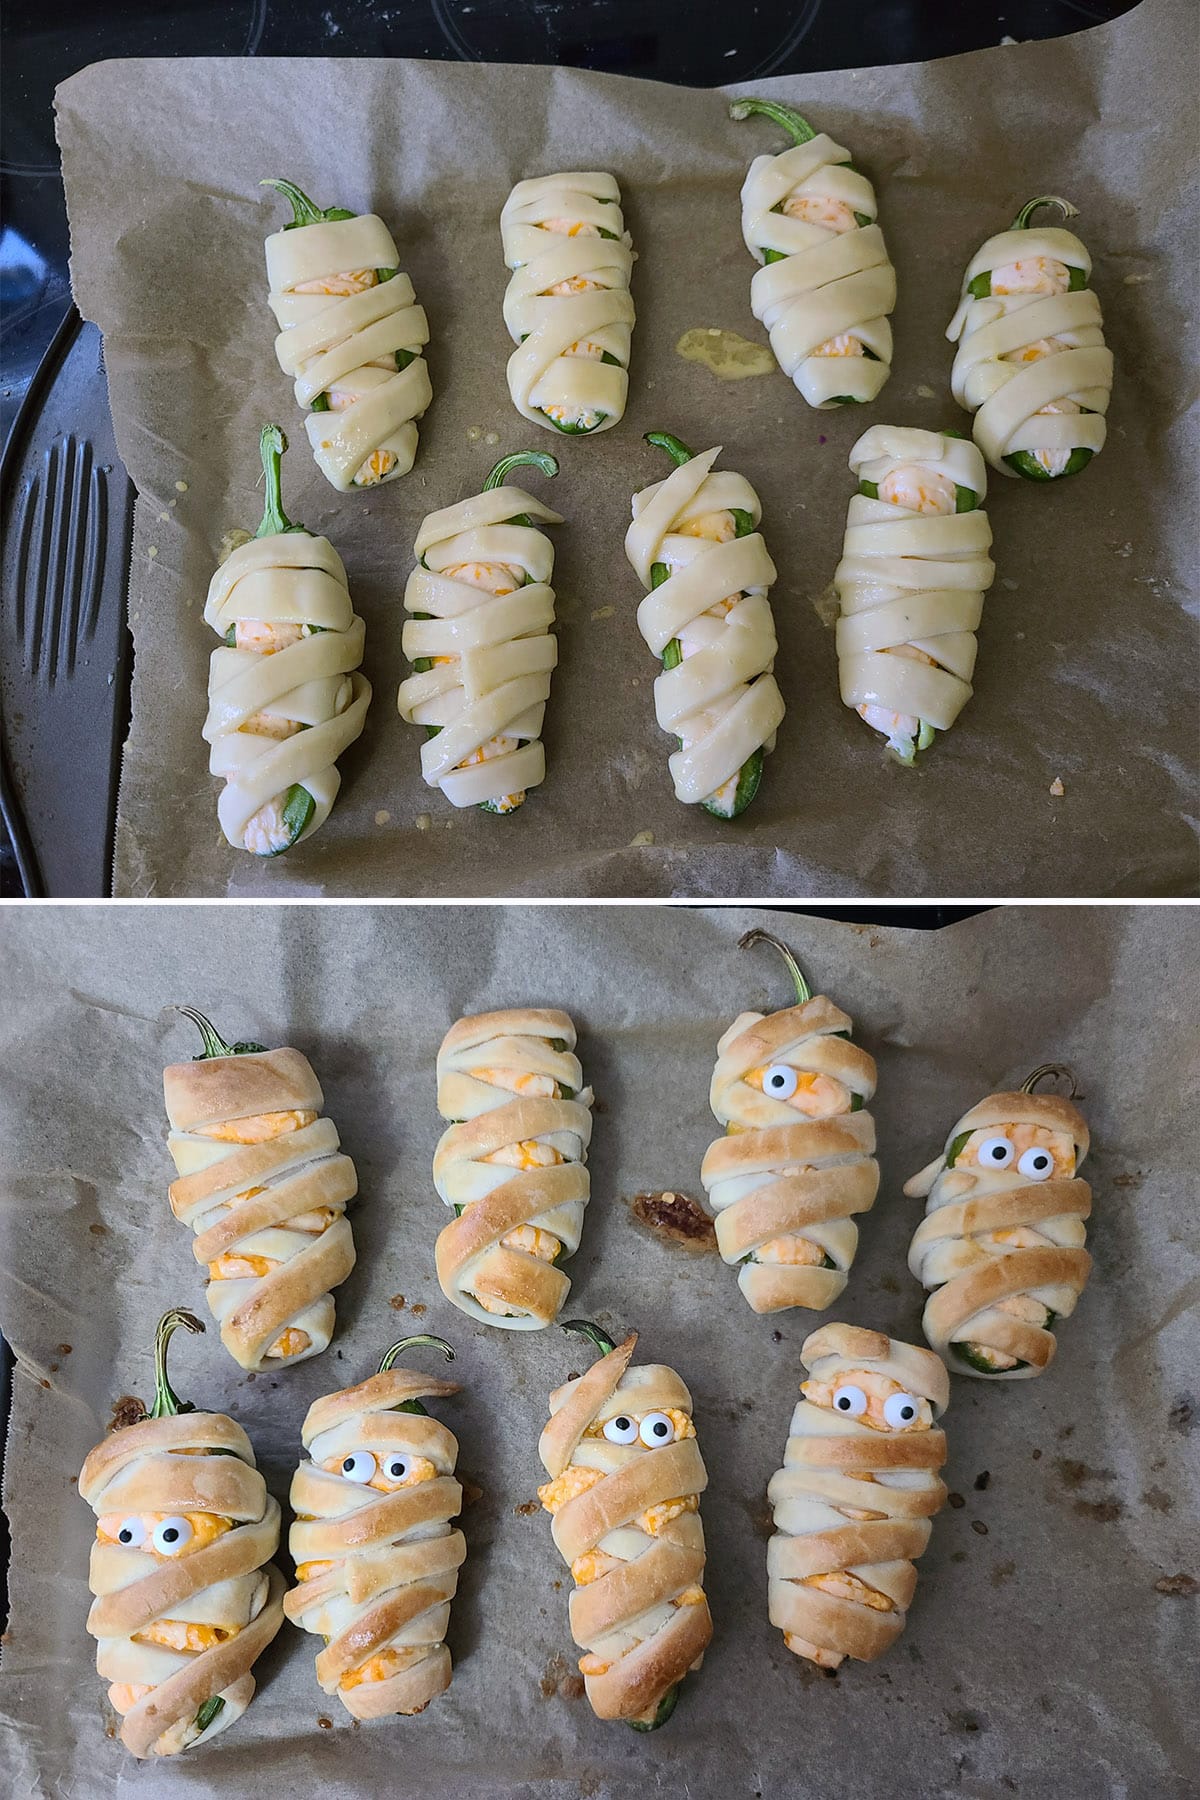 A 2 part image showing a pan of mummy jalapeno poppers, before and after baking.